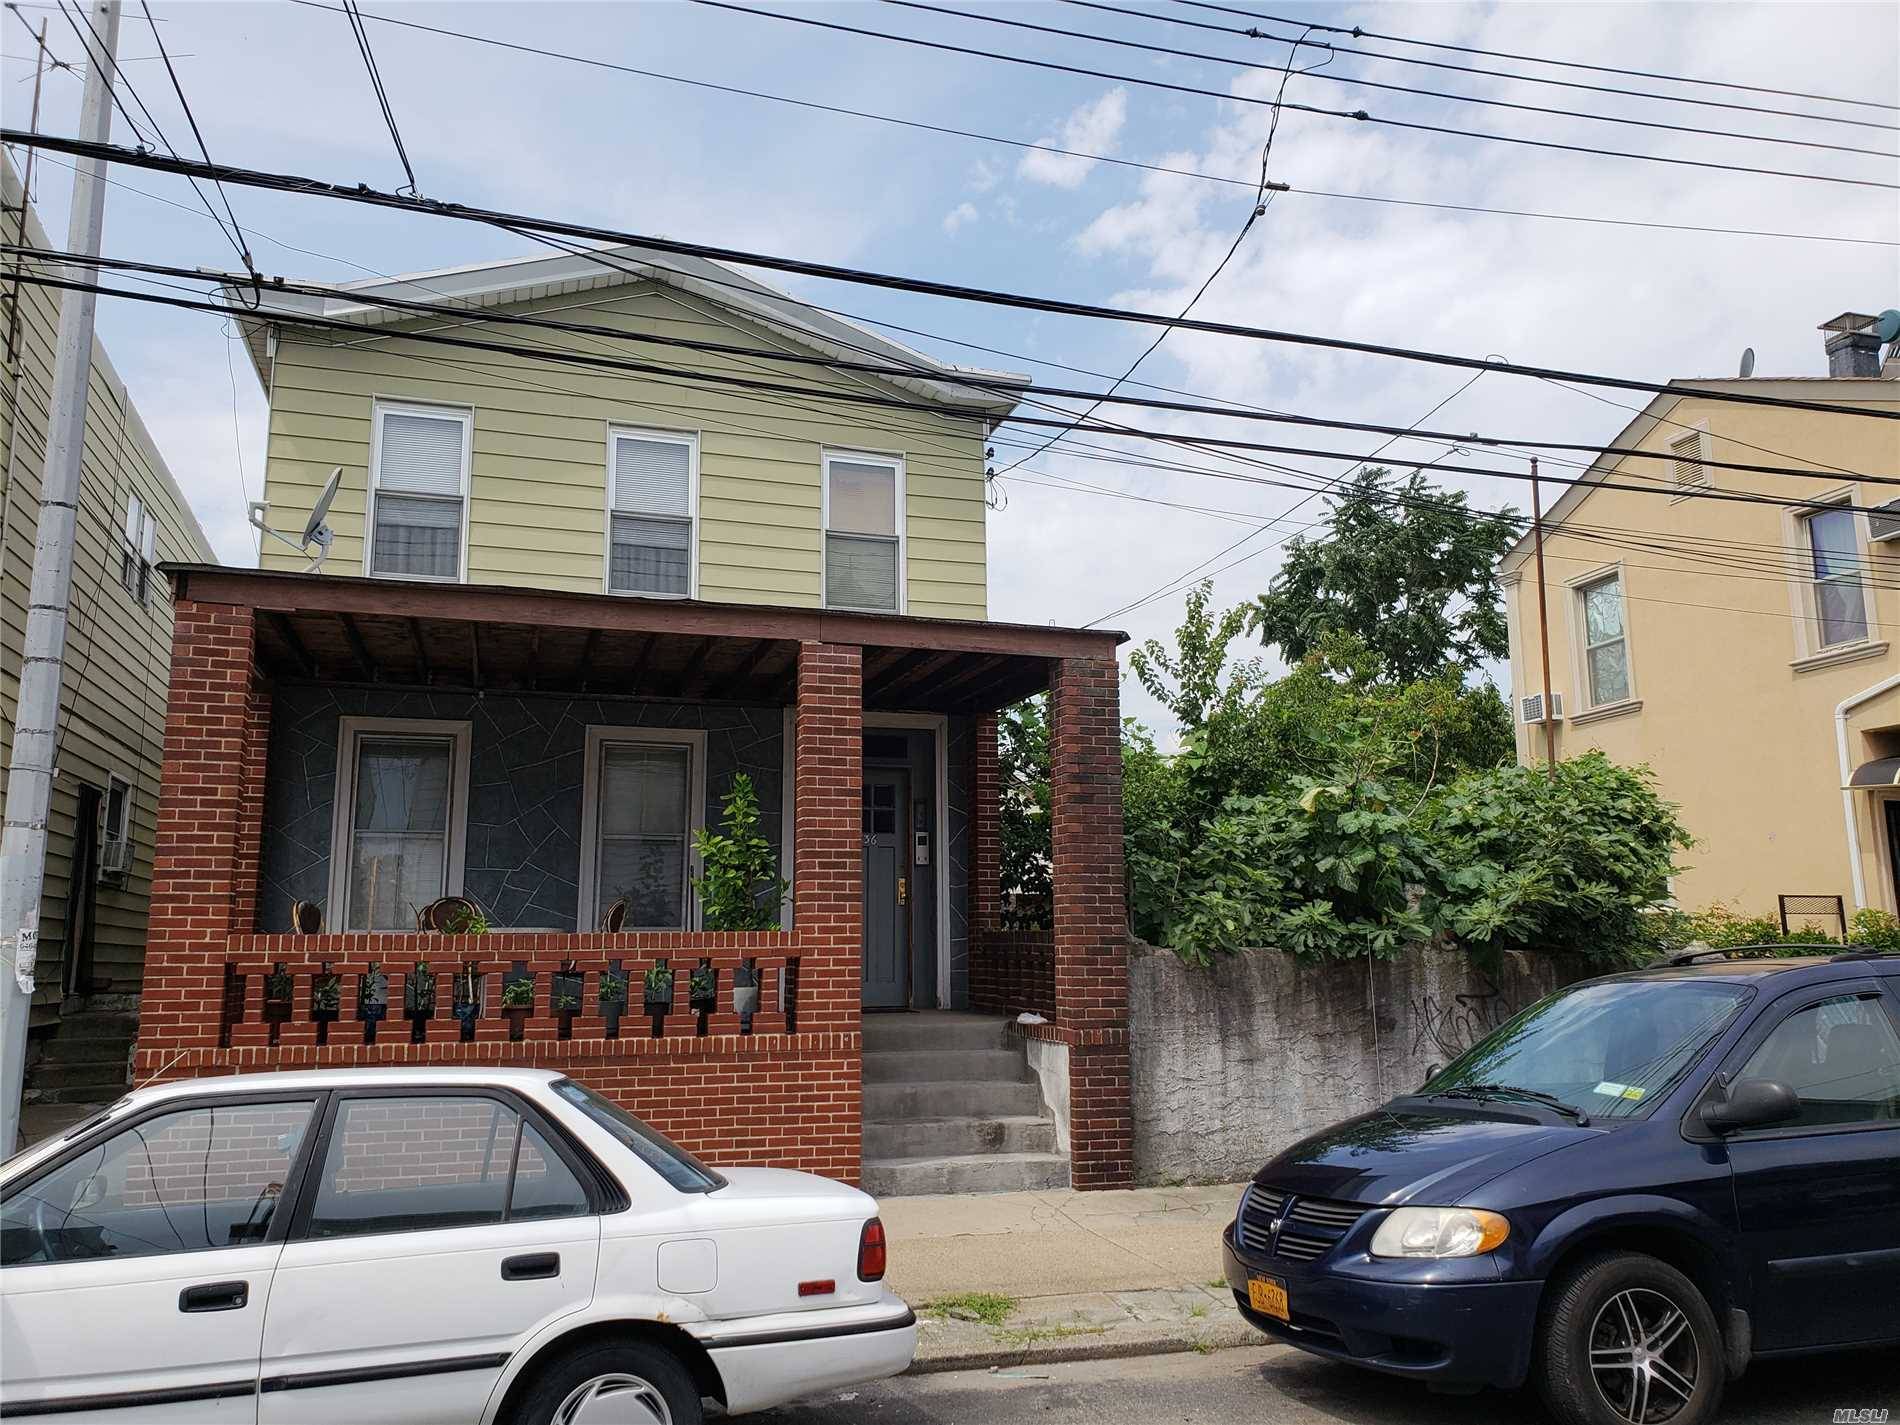 This 2 Family Home Sitting In The Heart Of Ozone Park Has 5 Bedrooms, 3 Full Baths, Full Basement With Laundry Room, Separate Entrance, Private Driveway With A 2 Car ...